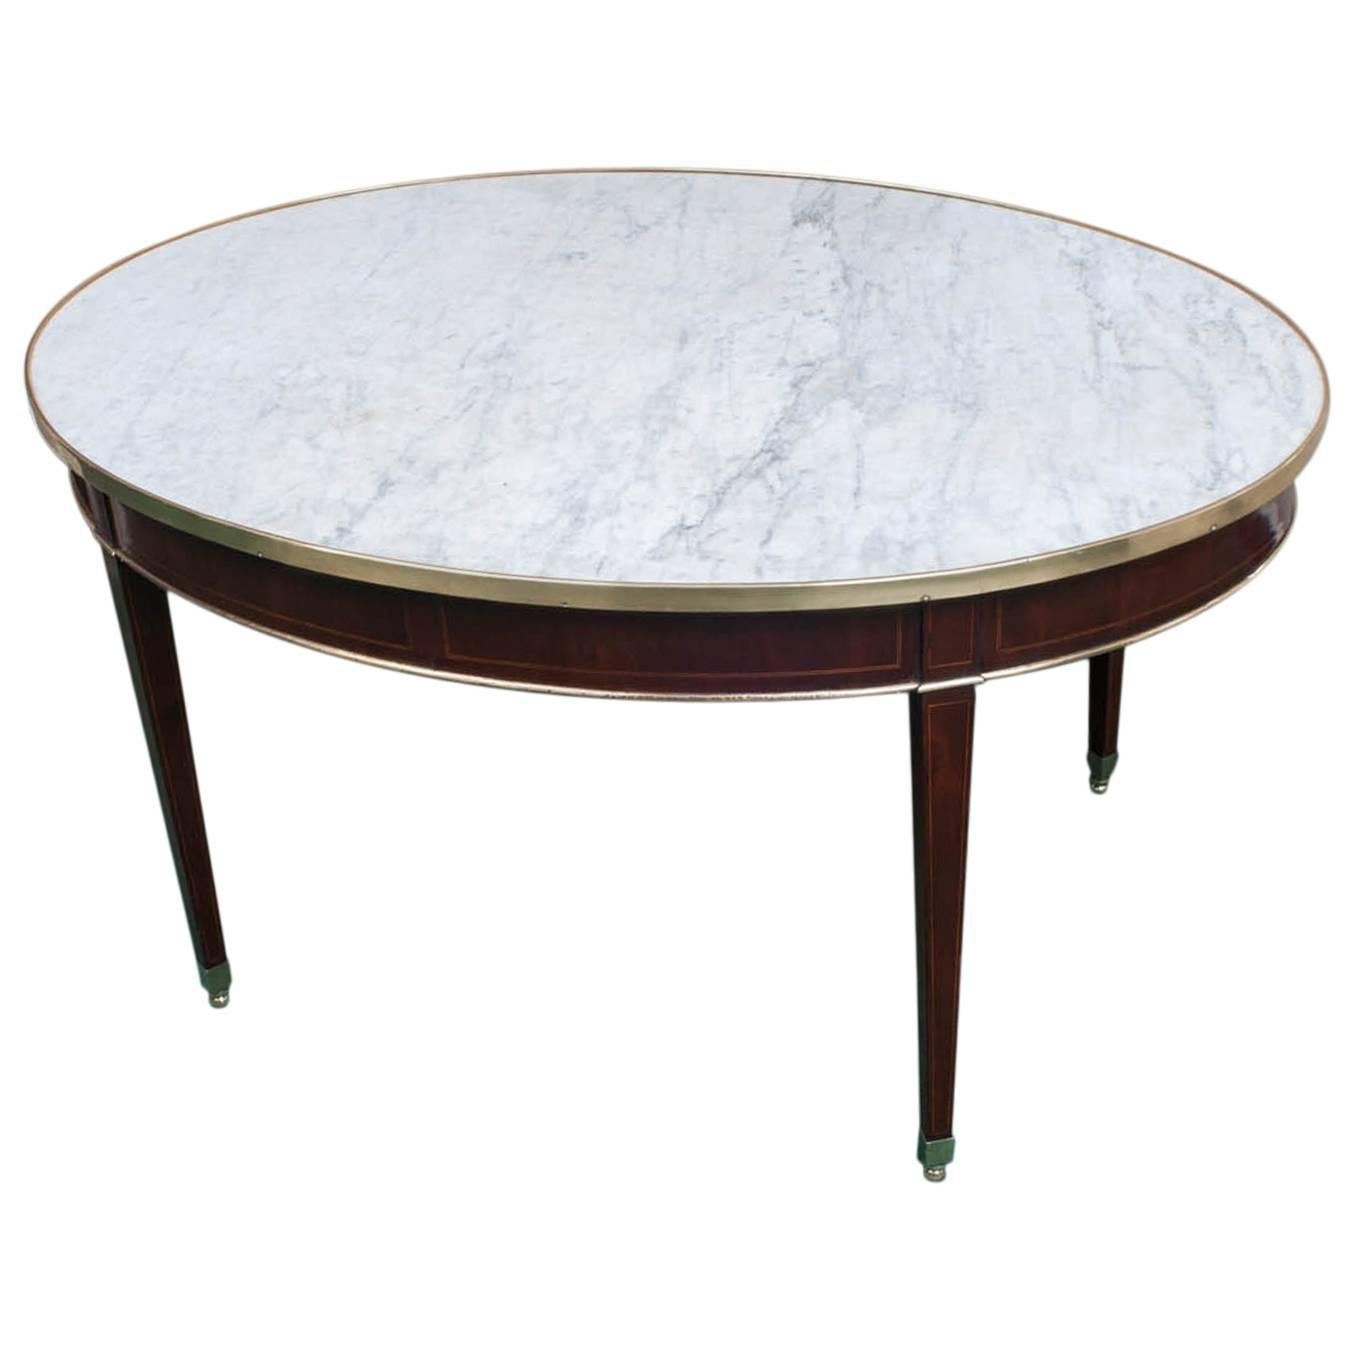 Rare Marble-Topped Edwardian Dining or Center Table, England, circa 1910